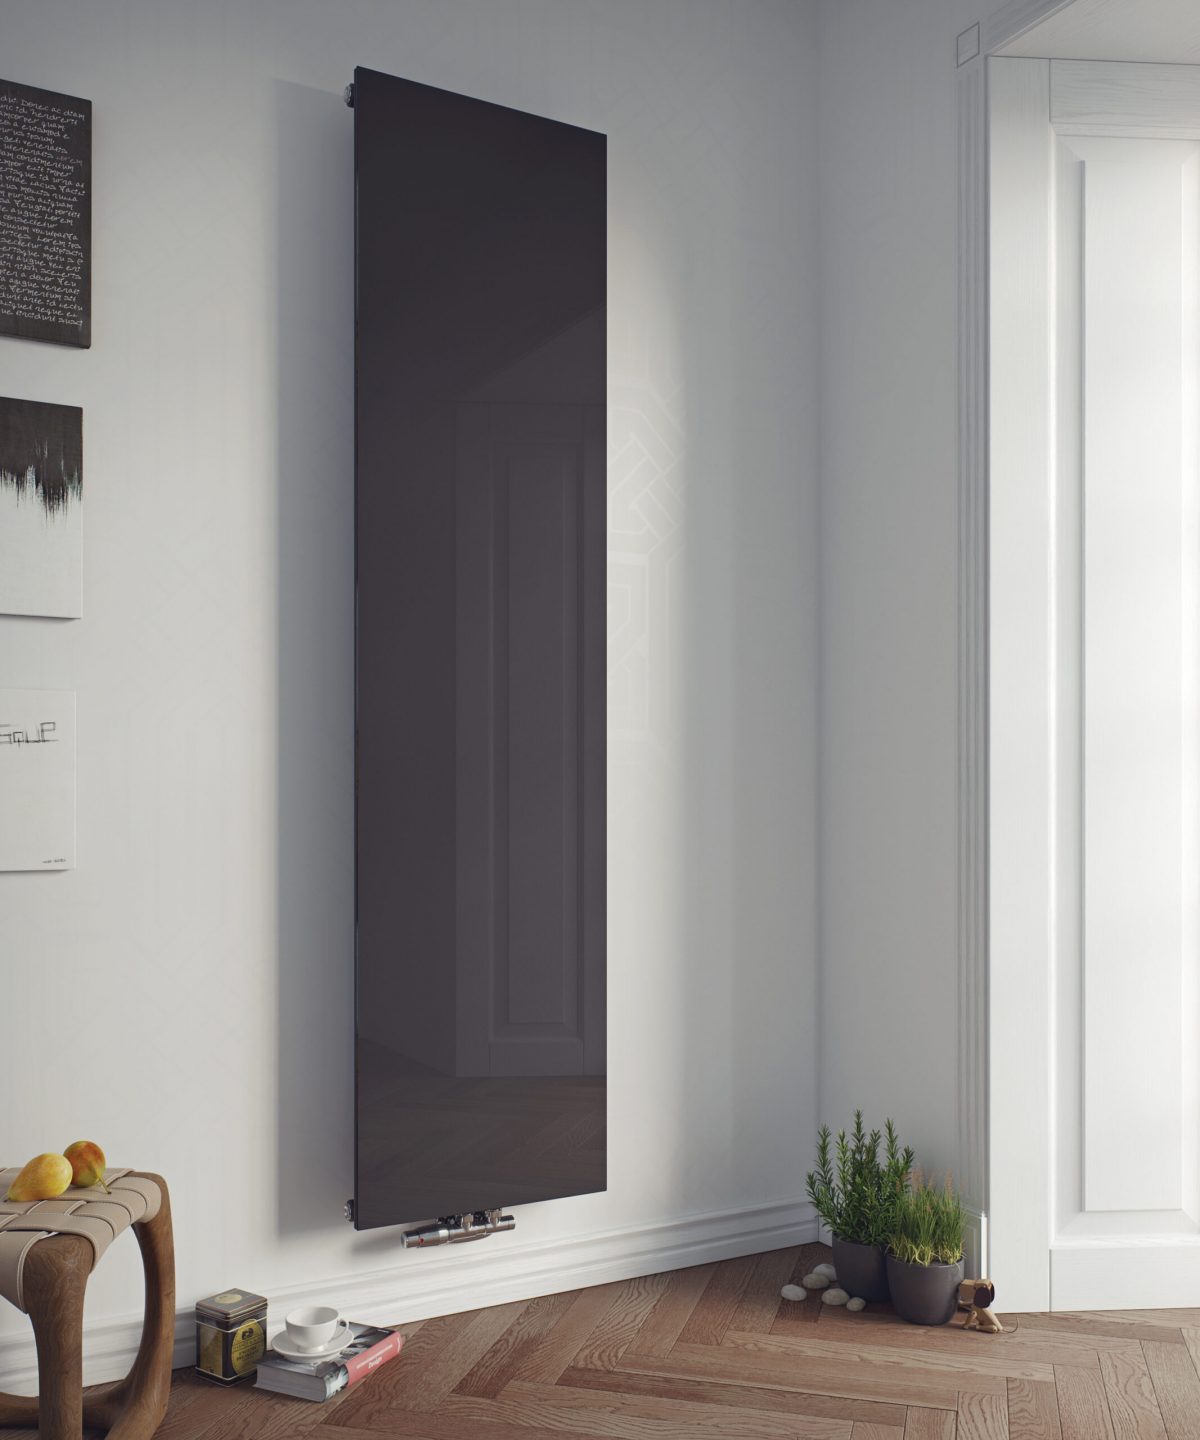 Mars Vitro Eco Single Vertical Designer Radiator Glass with Central Connection